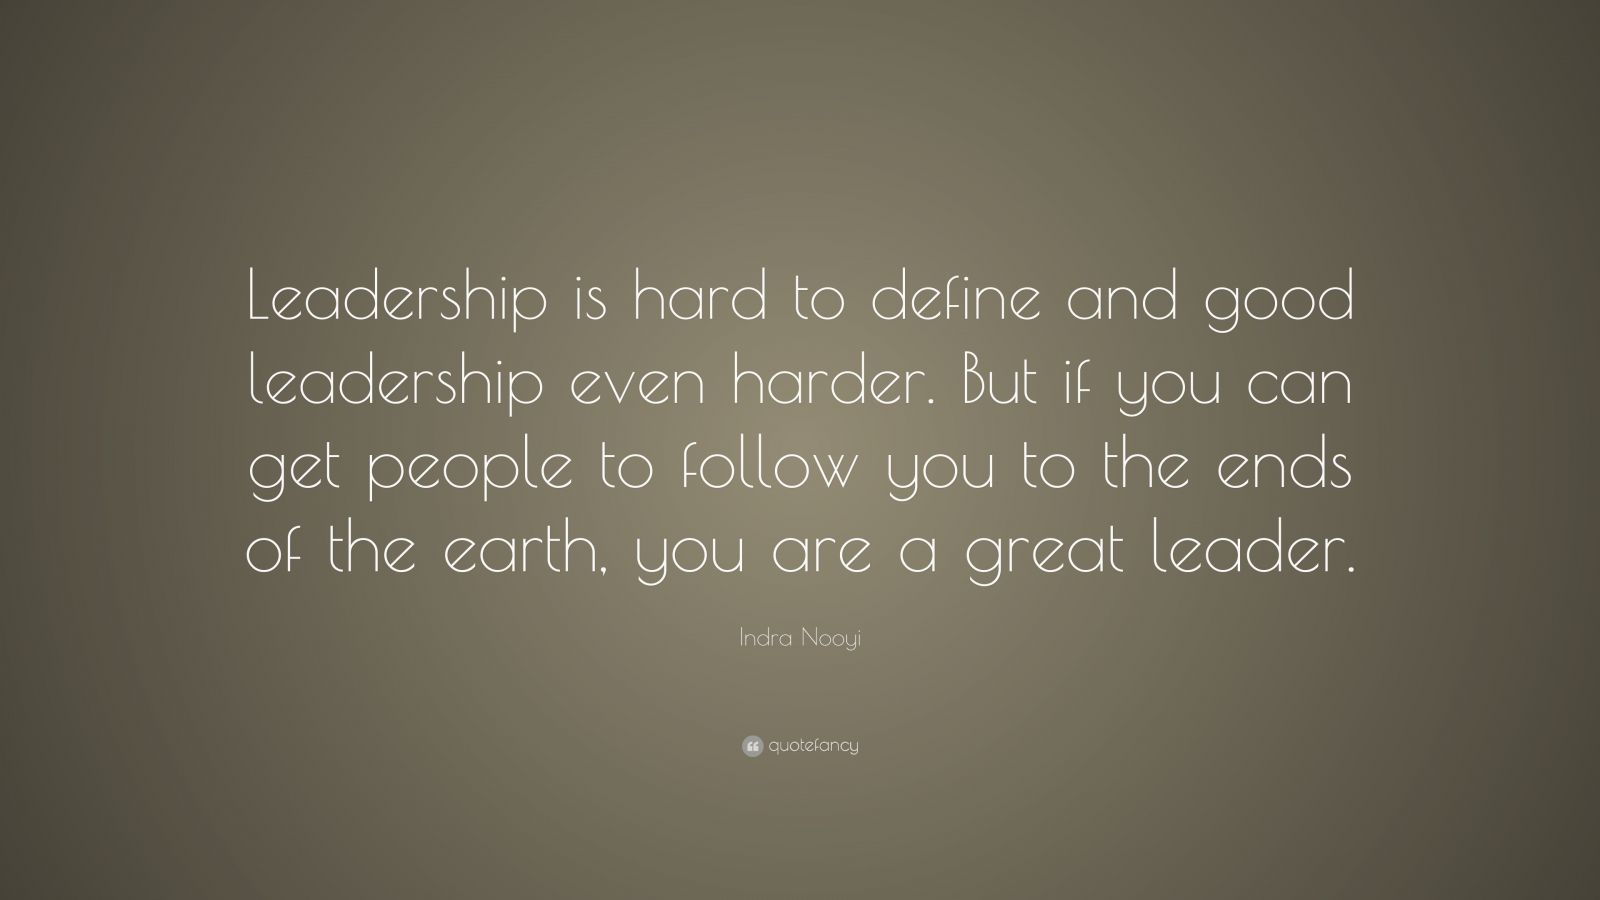 Indra Nooyi Quote: “Leadership is hard to define and good leadership ...